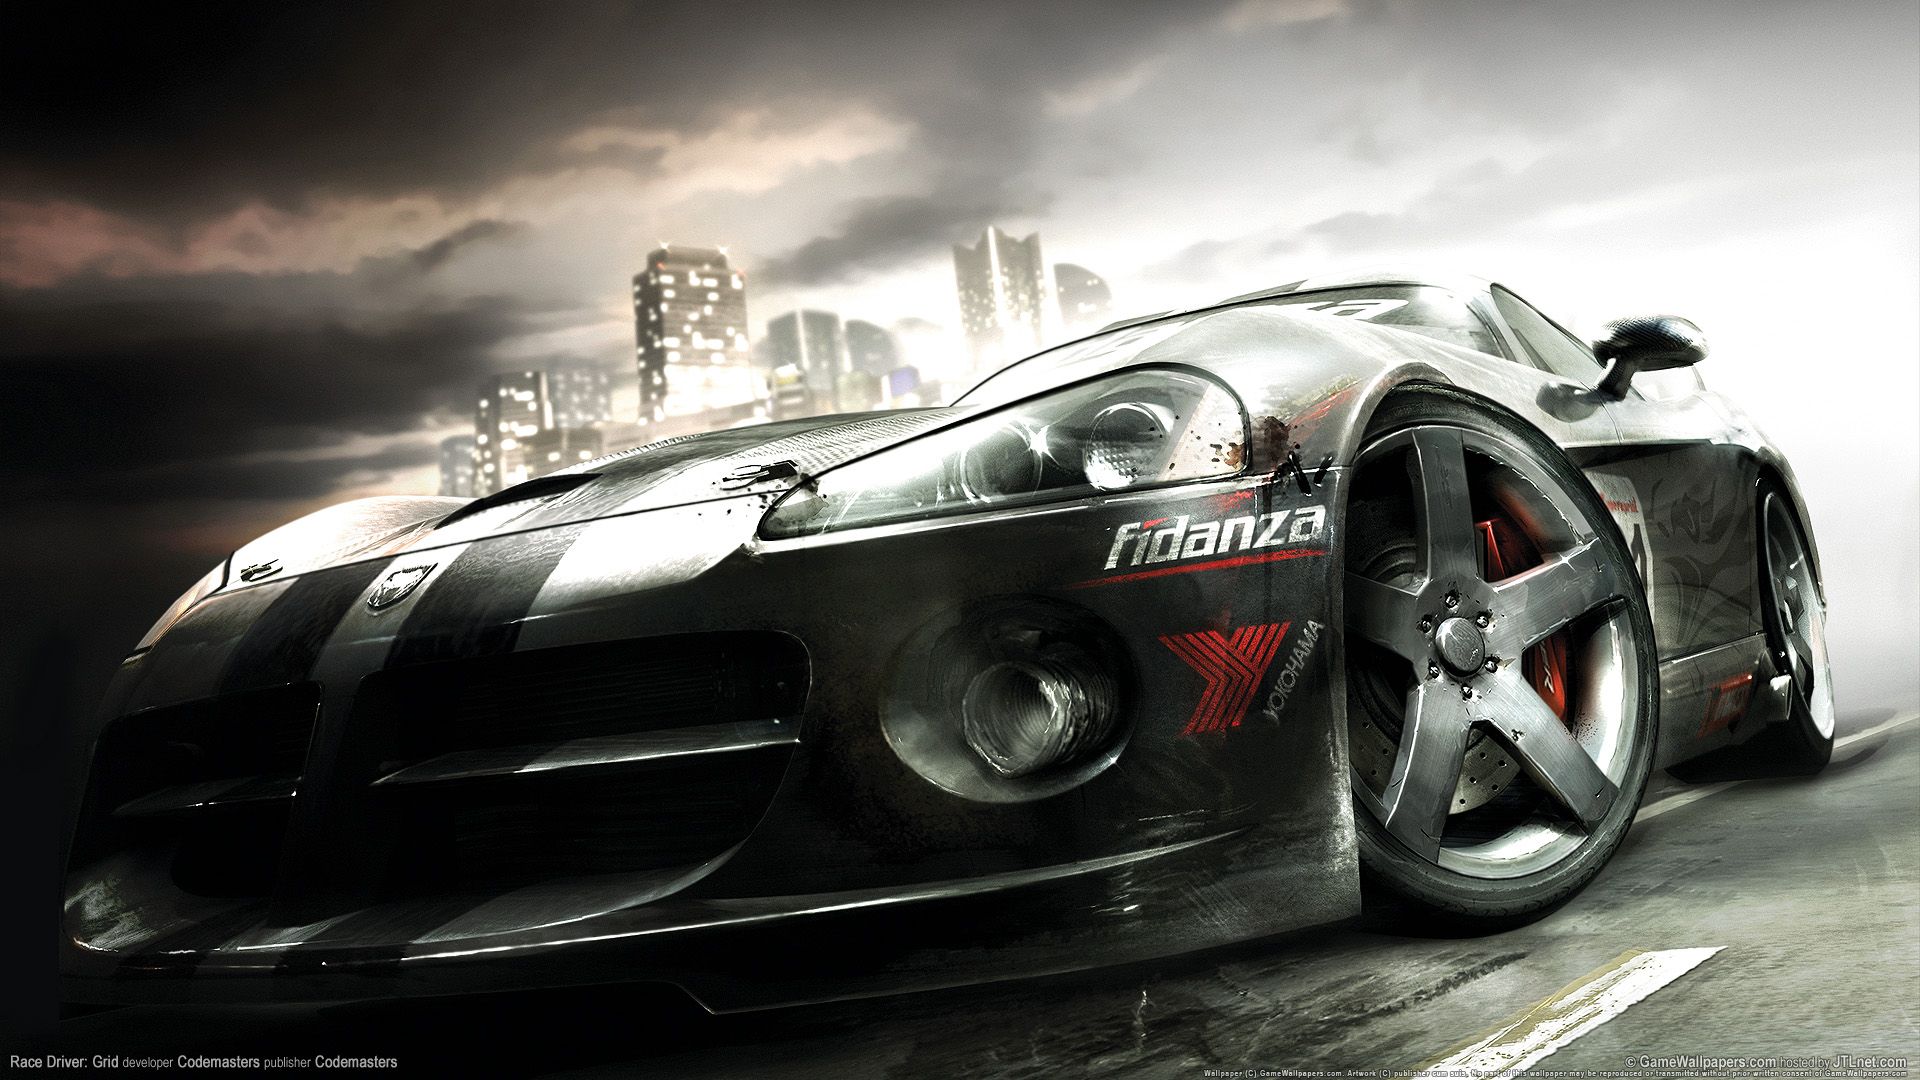 Race Driver Grid 2 HD wallpapers